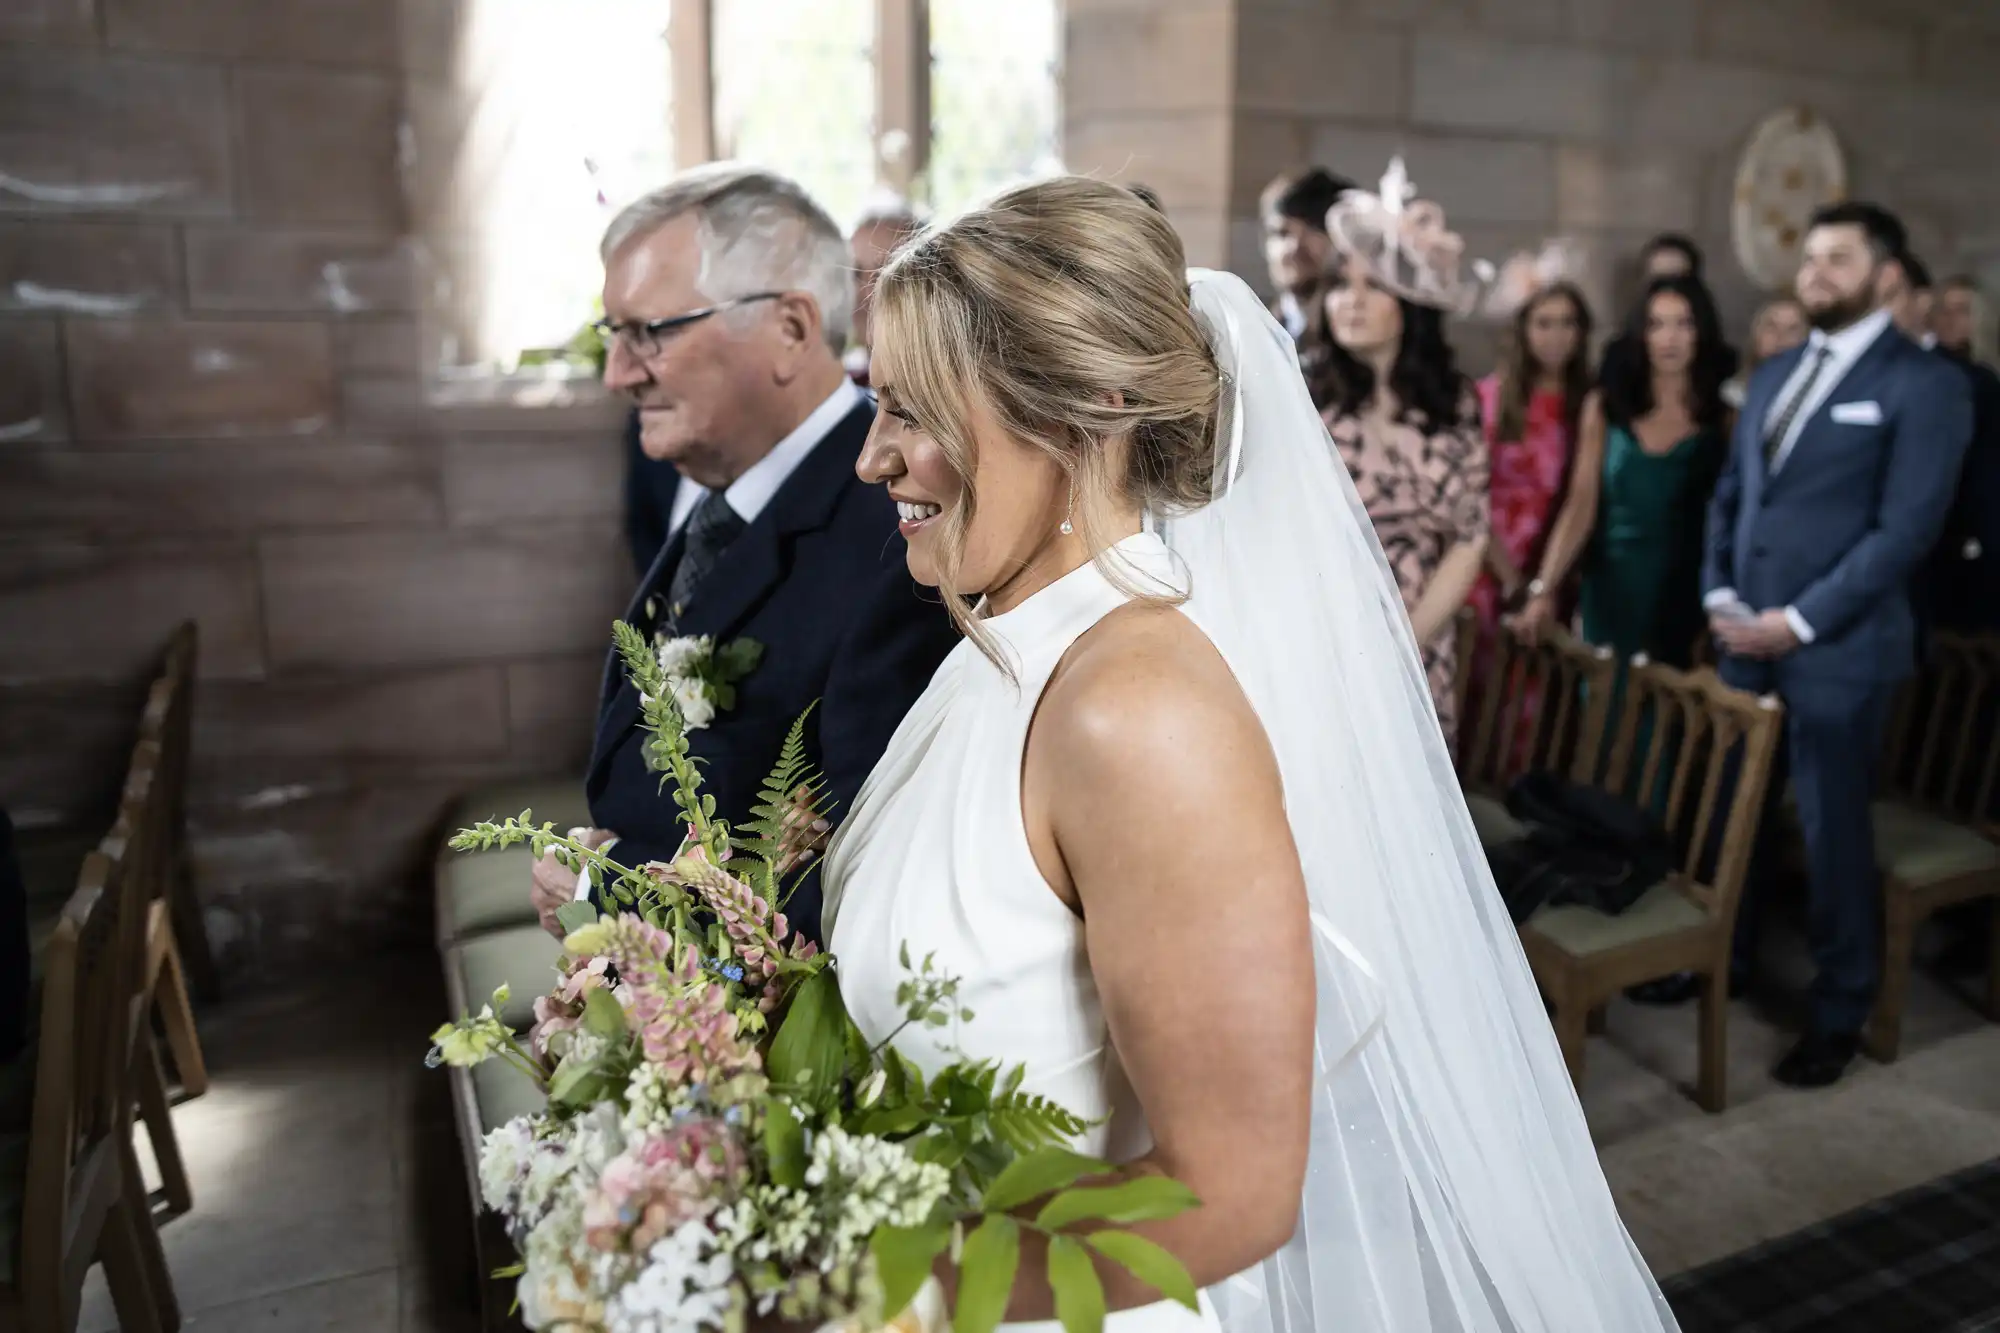 A bride in a white dress holding a bouquet walks down the aisle in a church, accompanied by an older man, with guests watching.